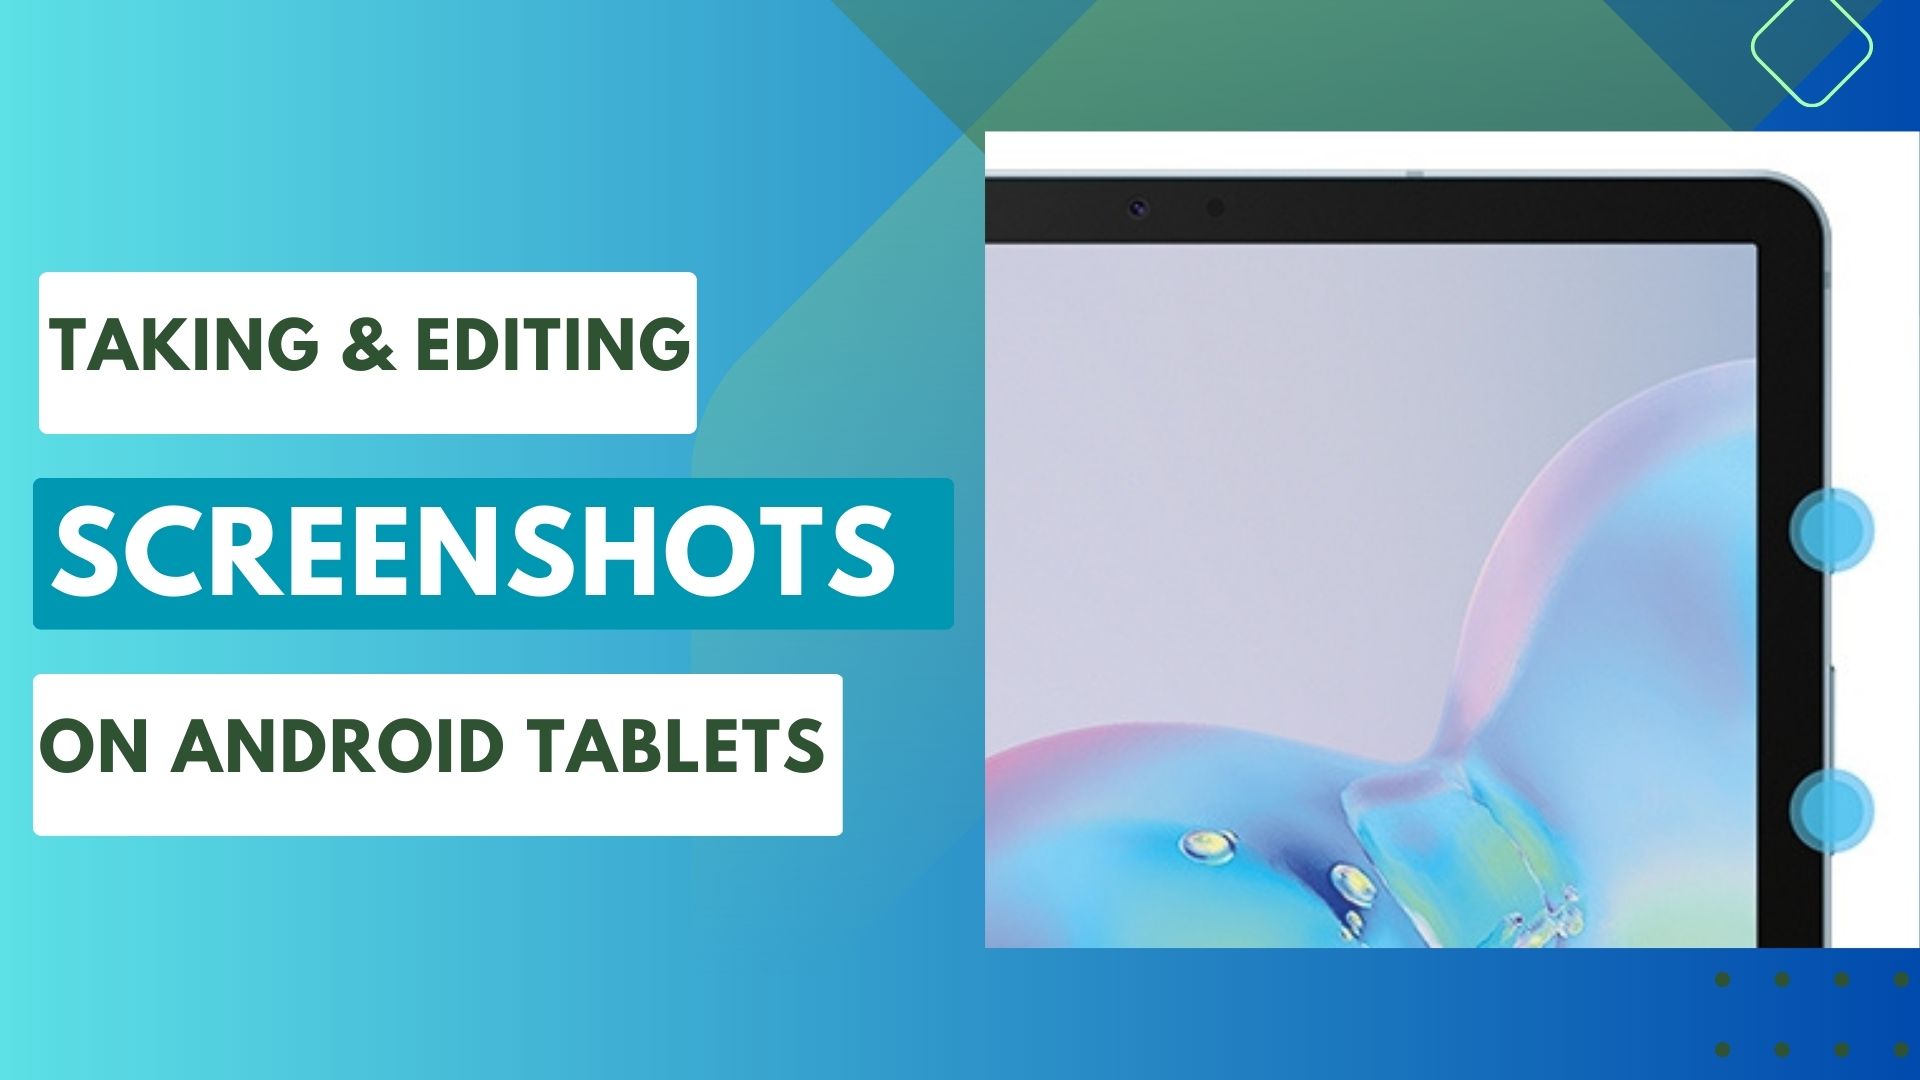 How to take and edit screenshots on Android Tablets